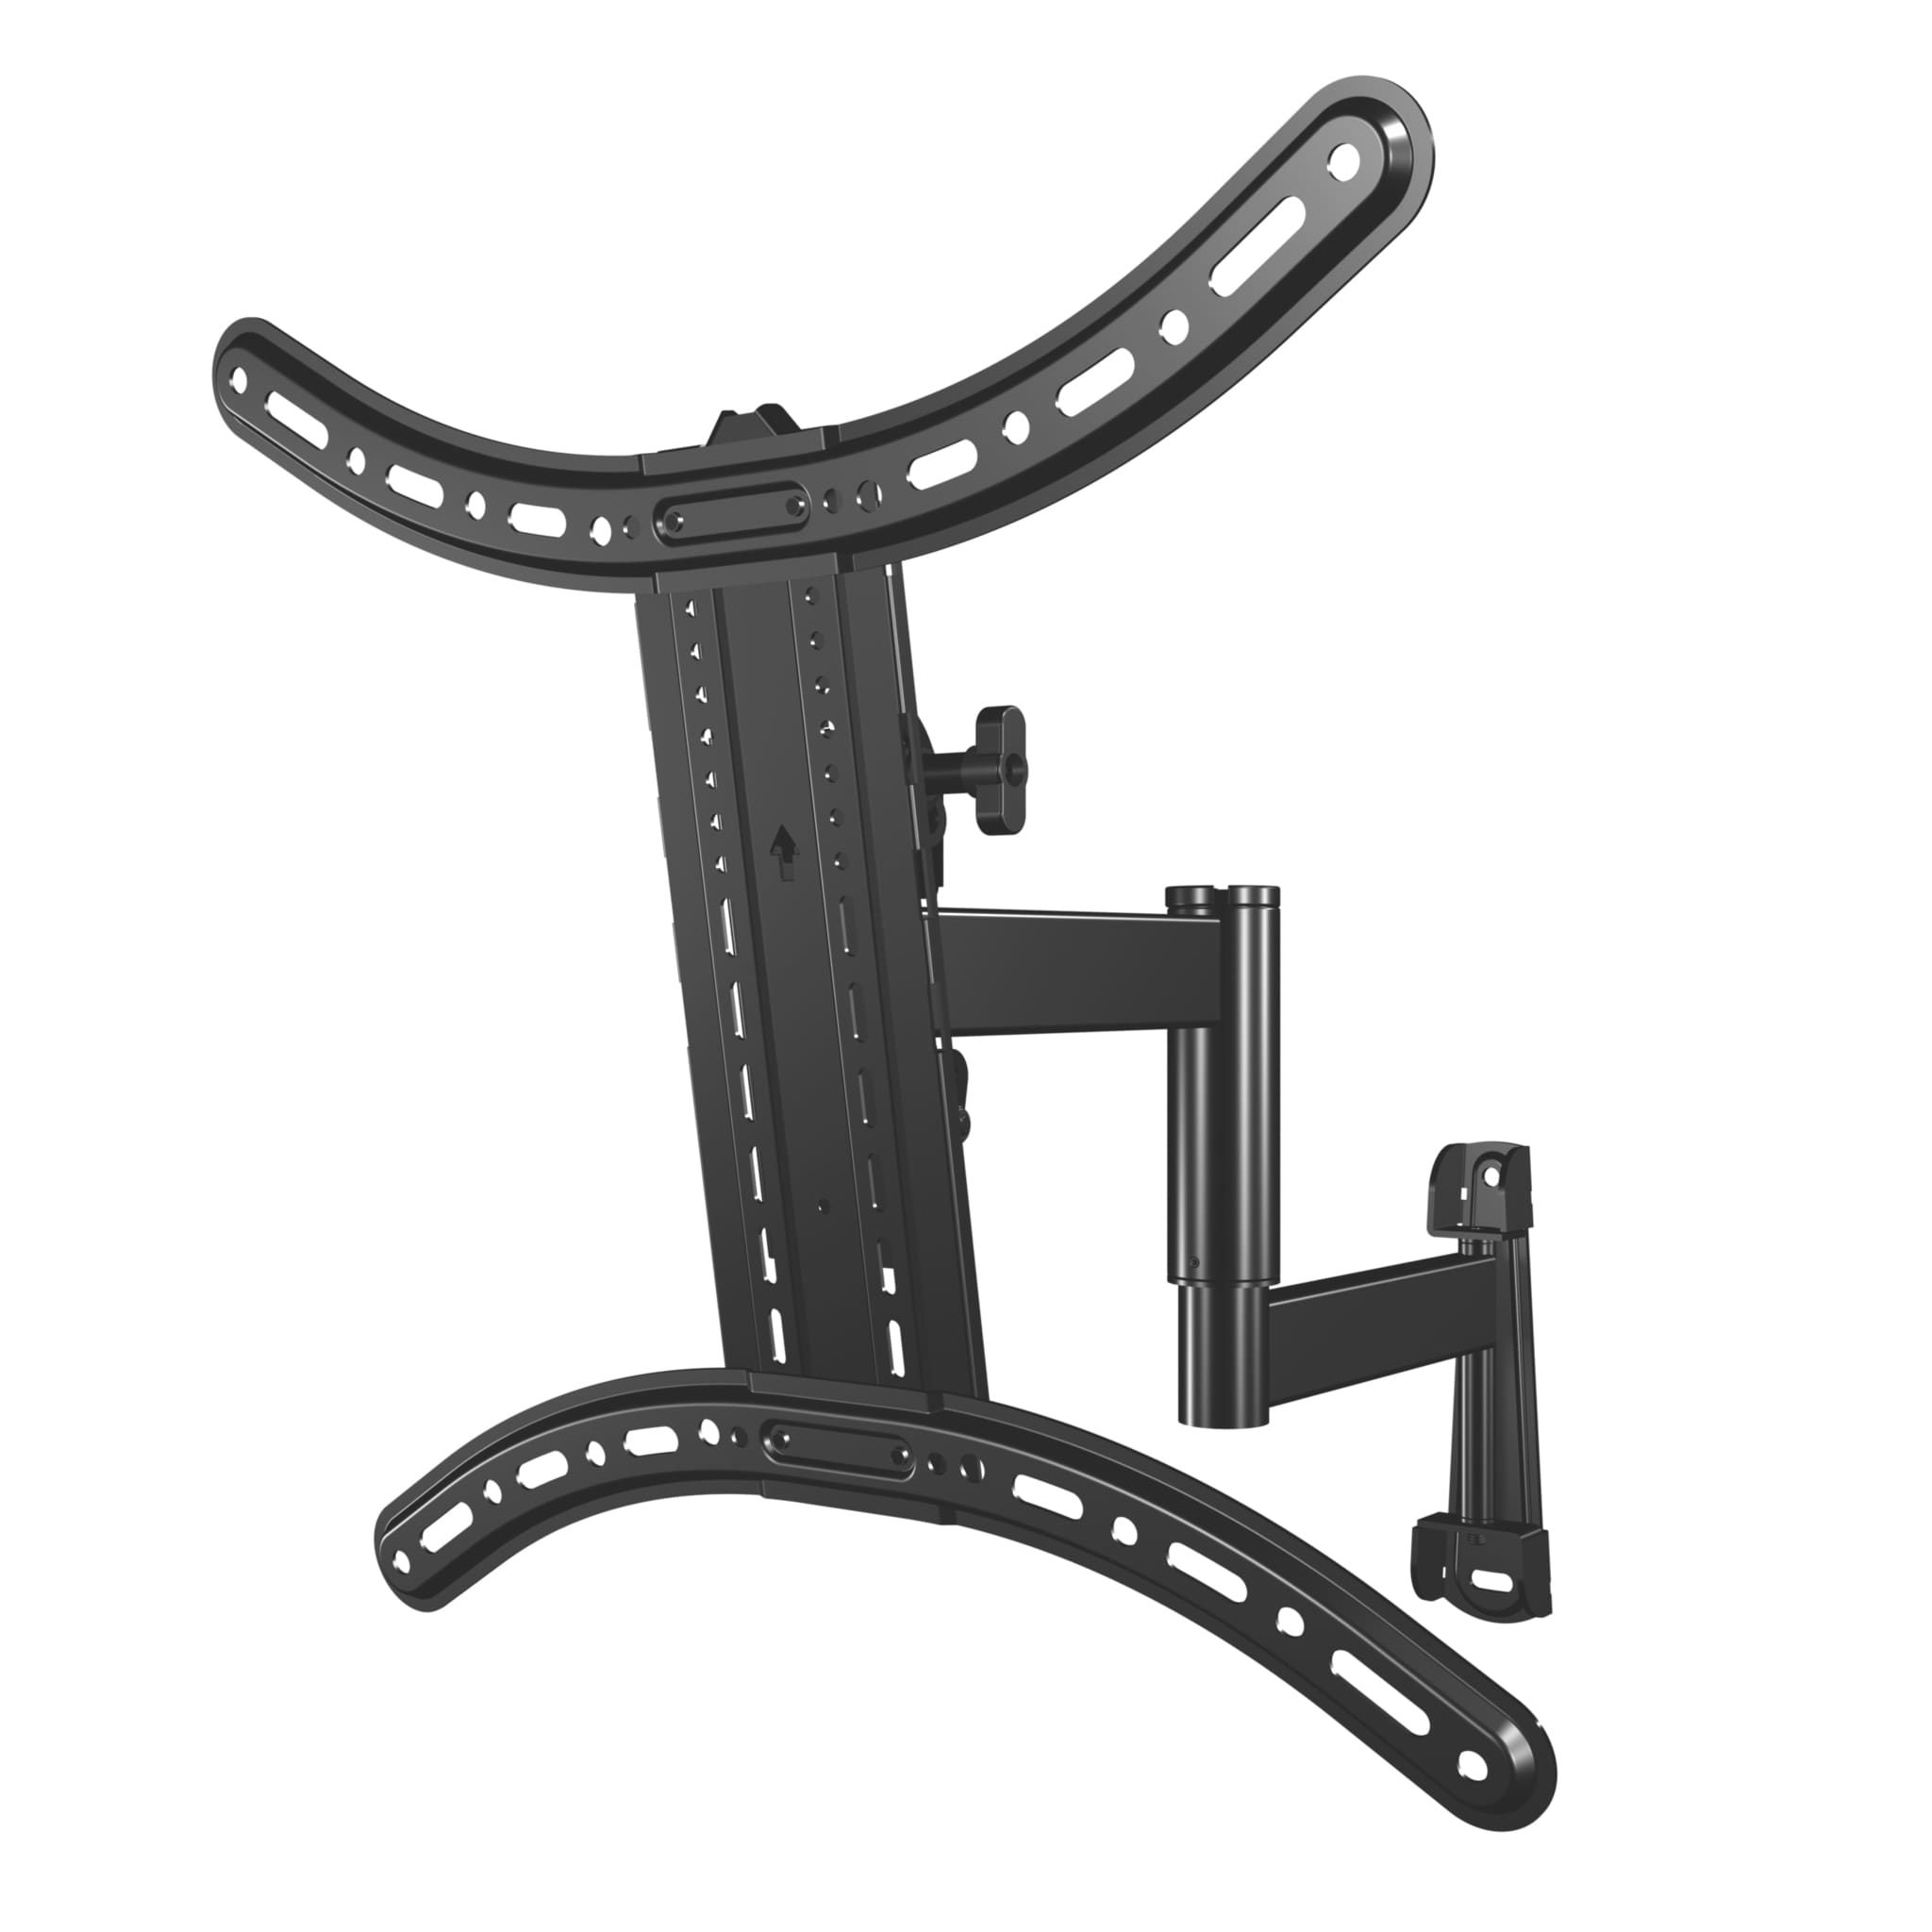 Full Motion Indoor Wall TV Mount Fits TVs up to 55-in (Hardware Included) in Black | - Sanus LMF219B1